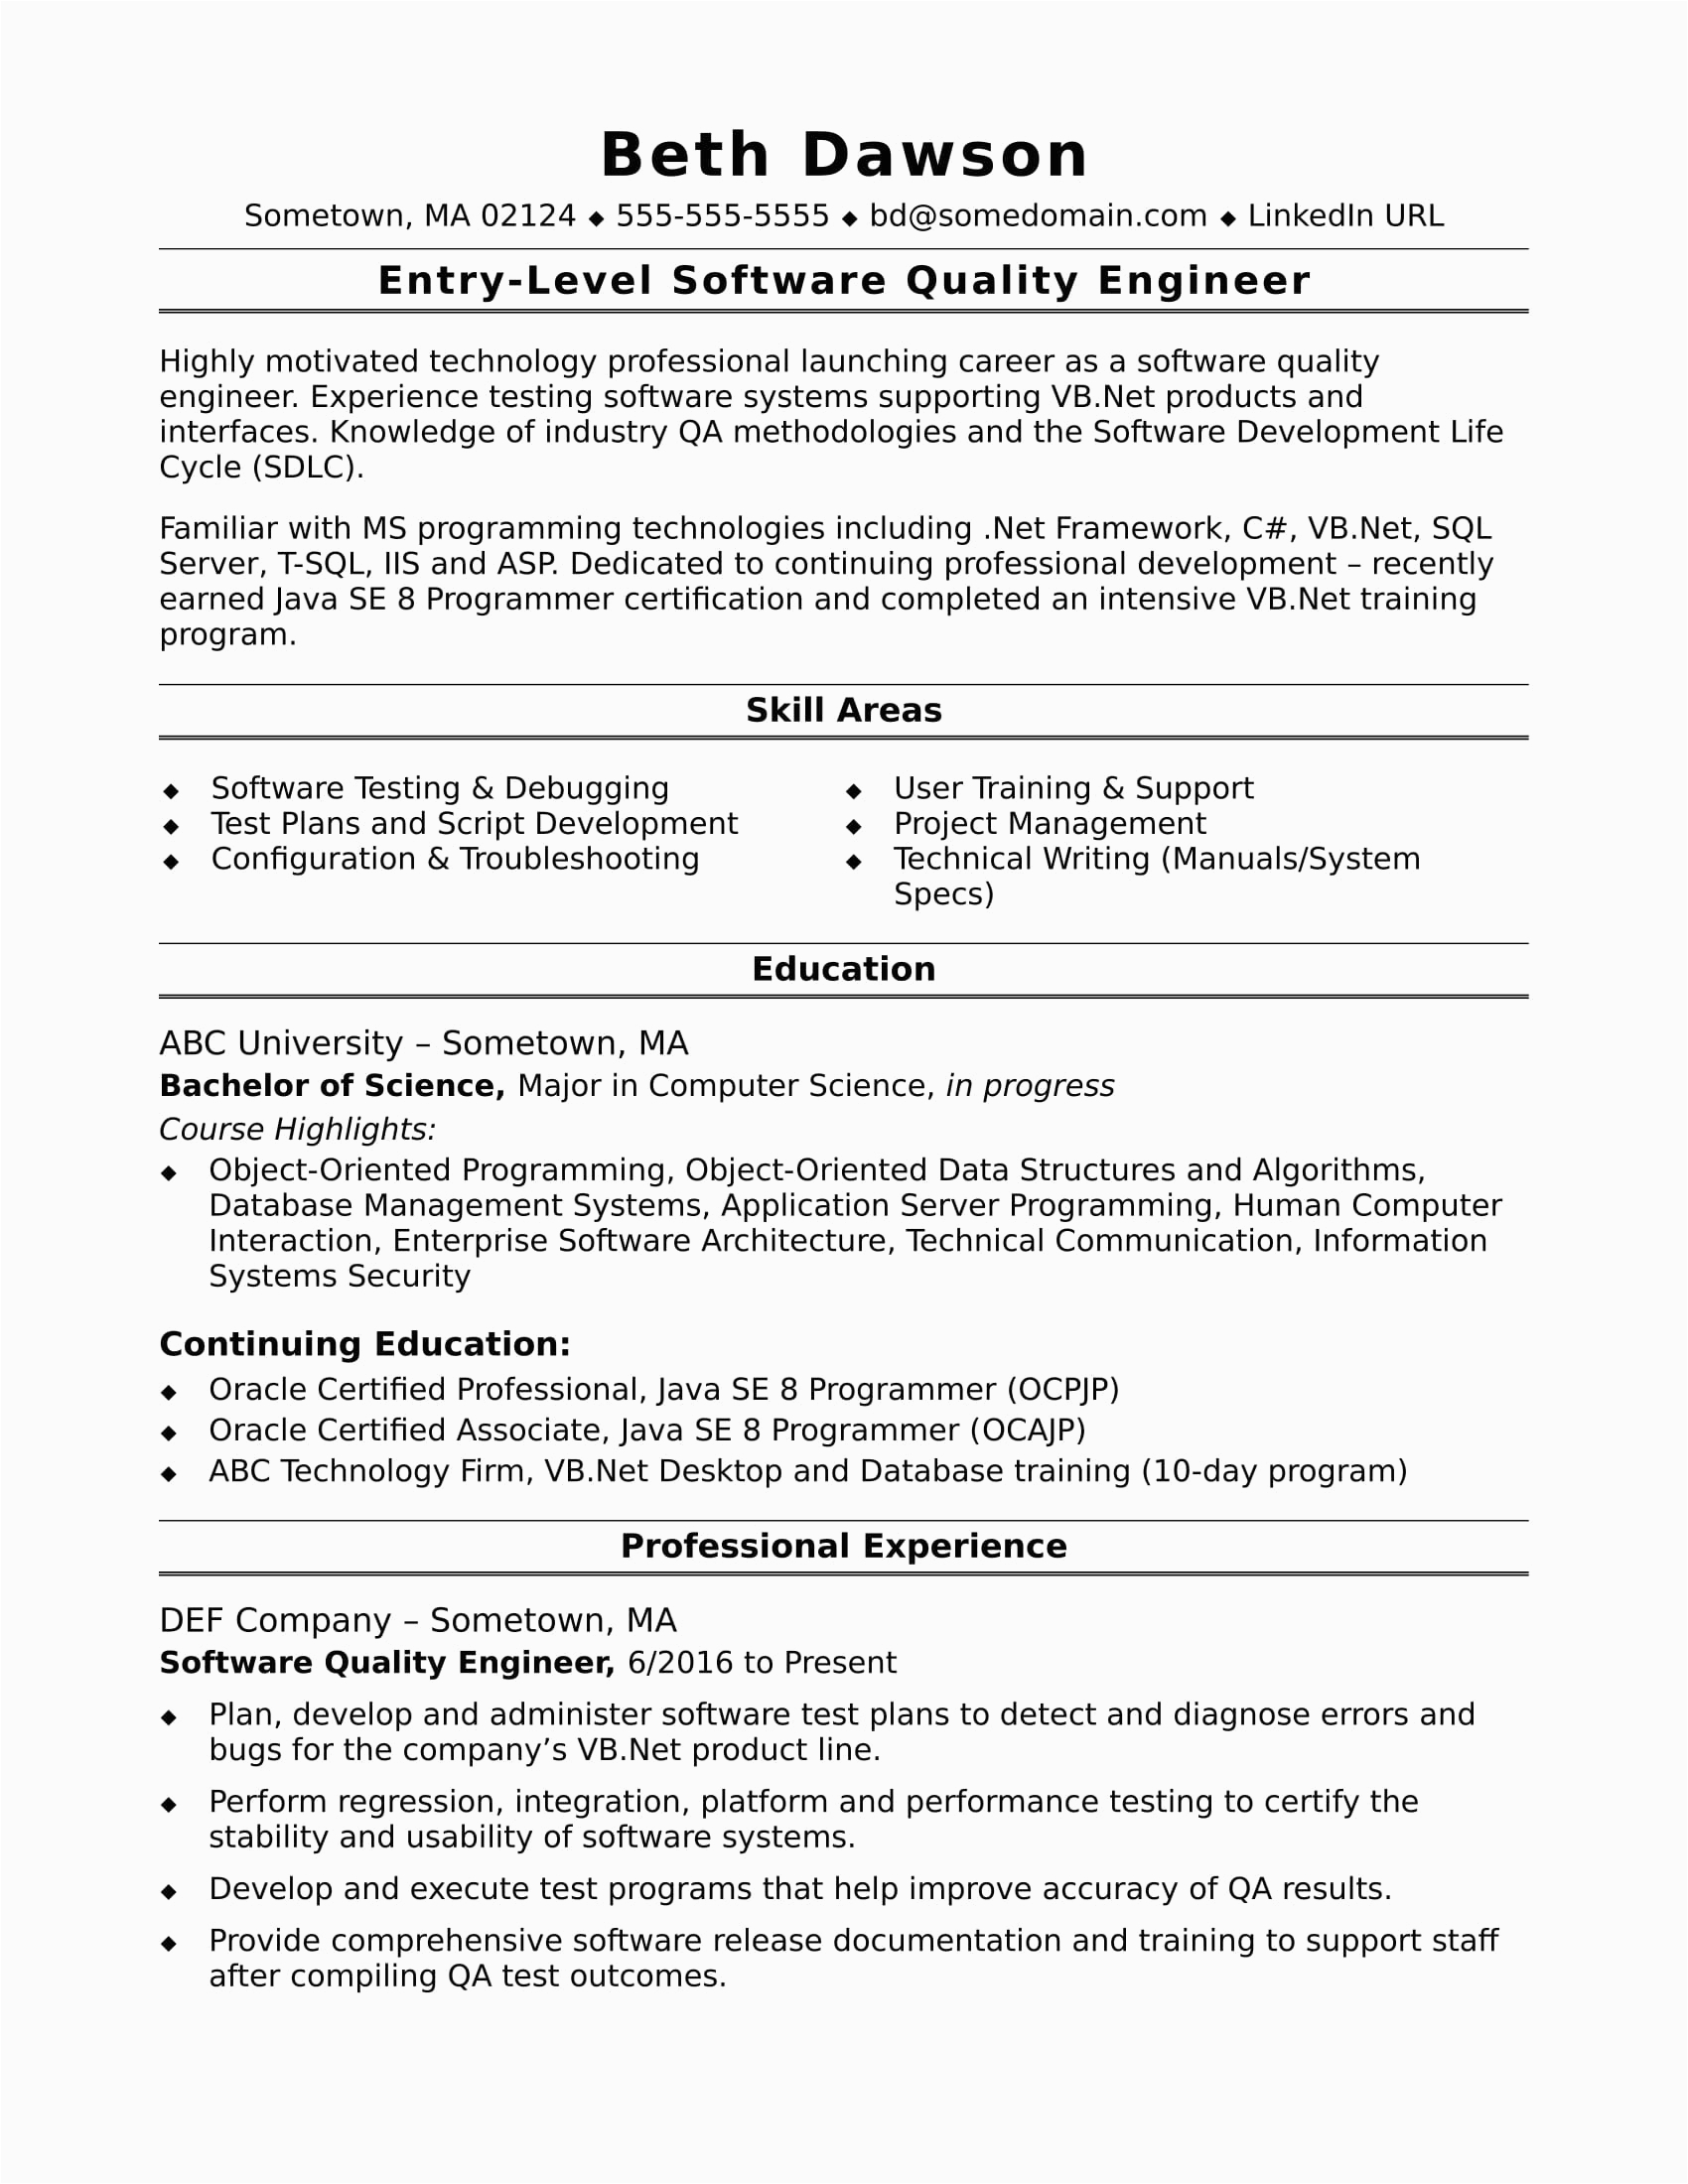 Entry Level It Resume Examples and Samples Sample Resume for An Entry Level Quality Engineer